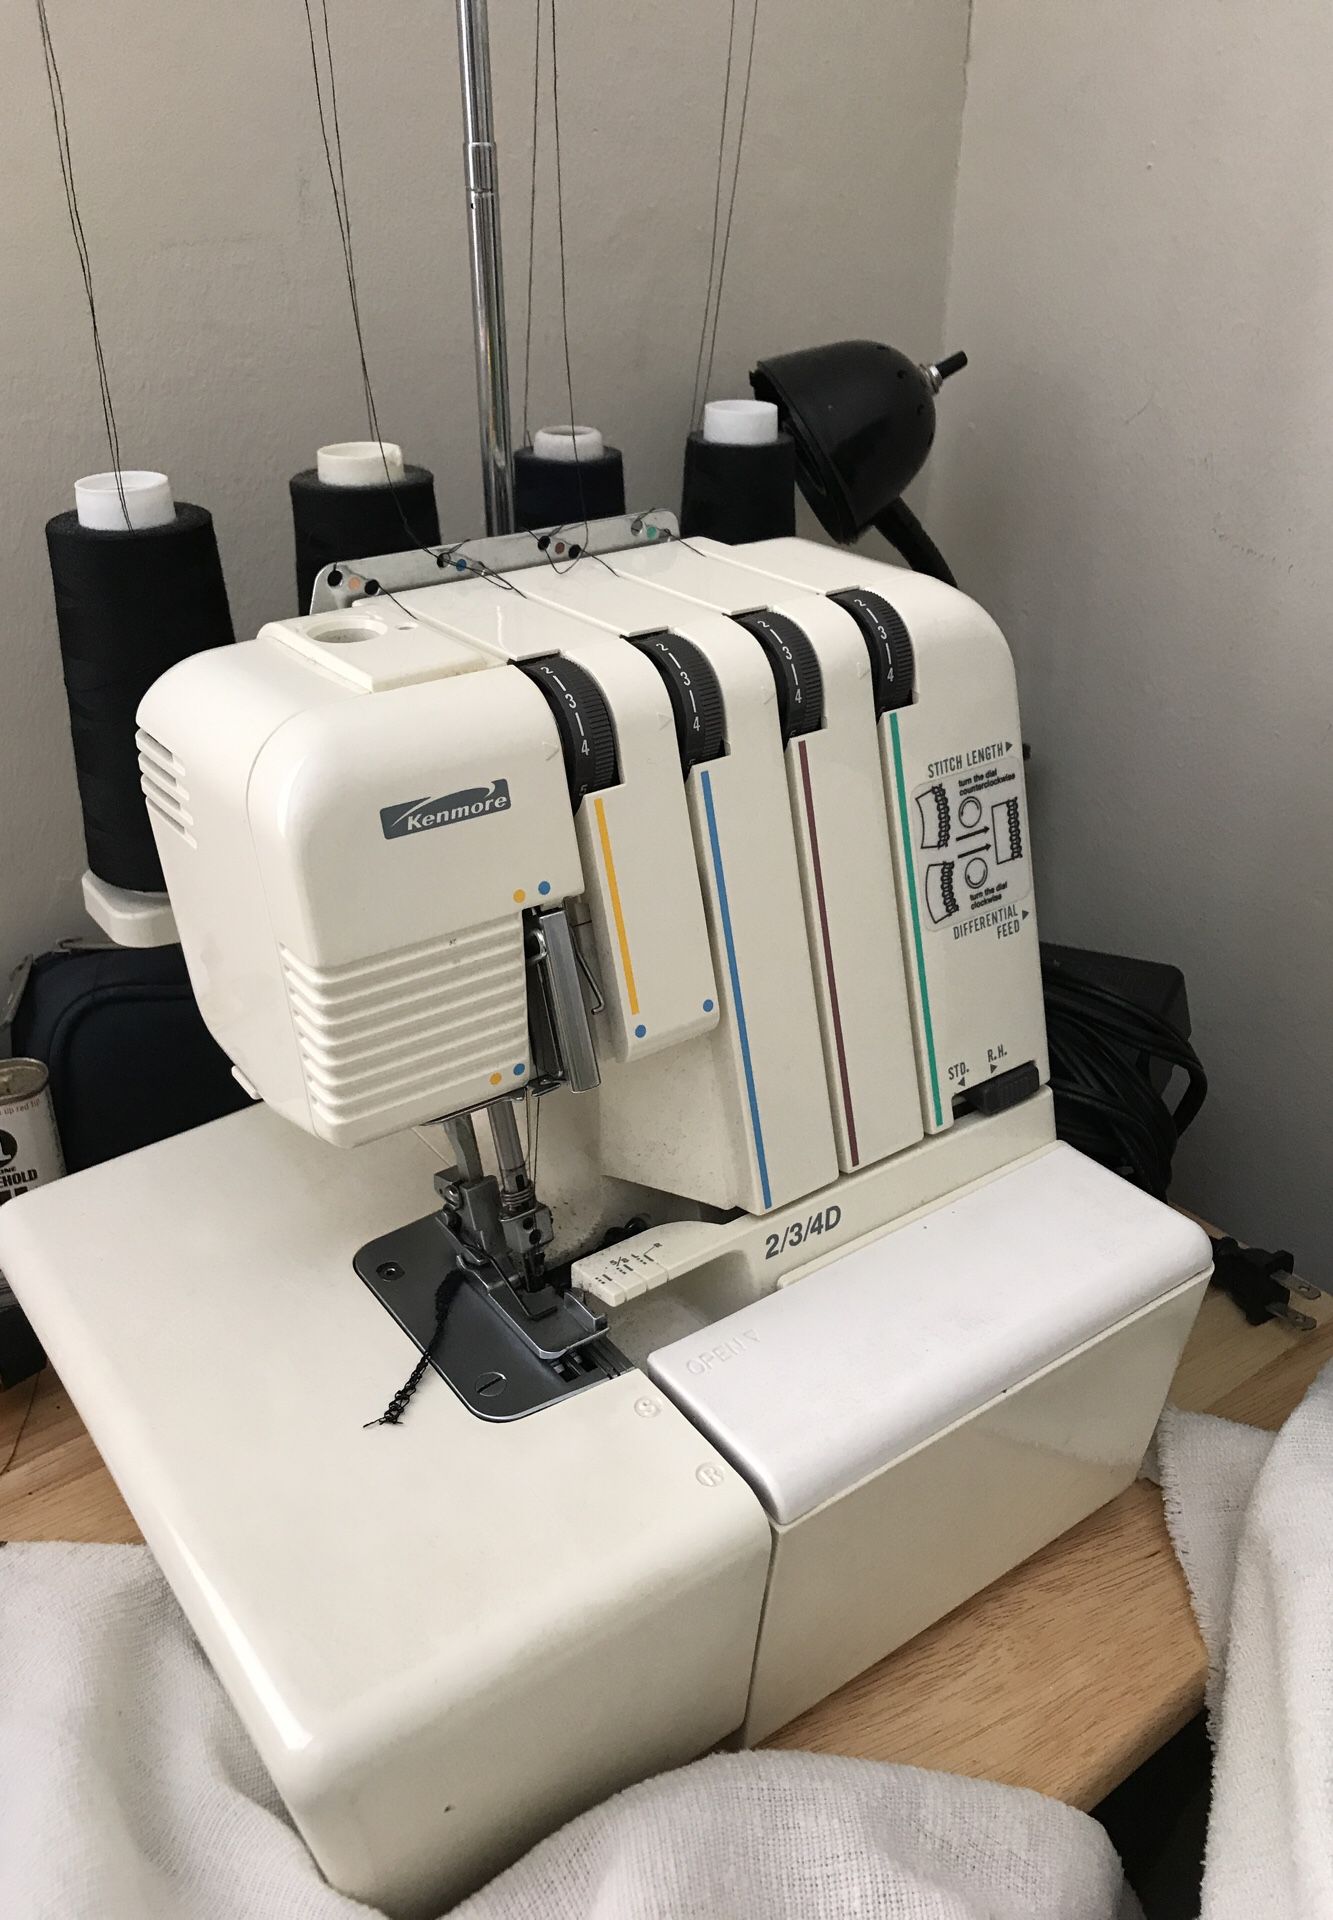 Kenmore sewing machine 2/3/4D